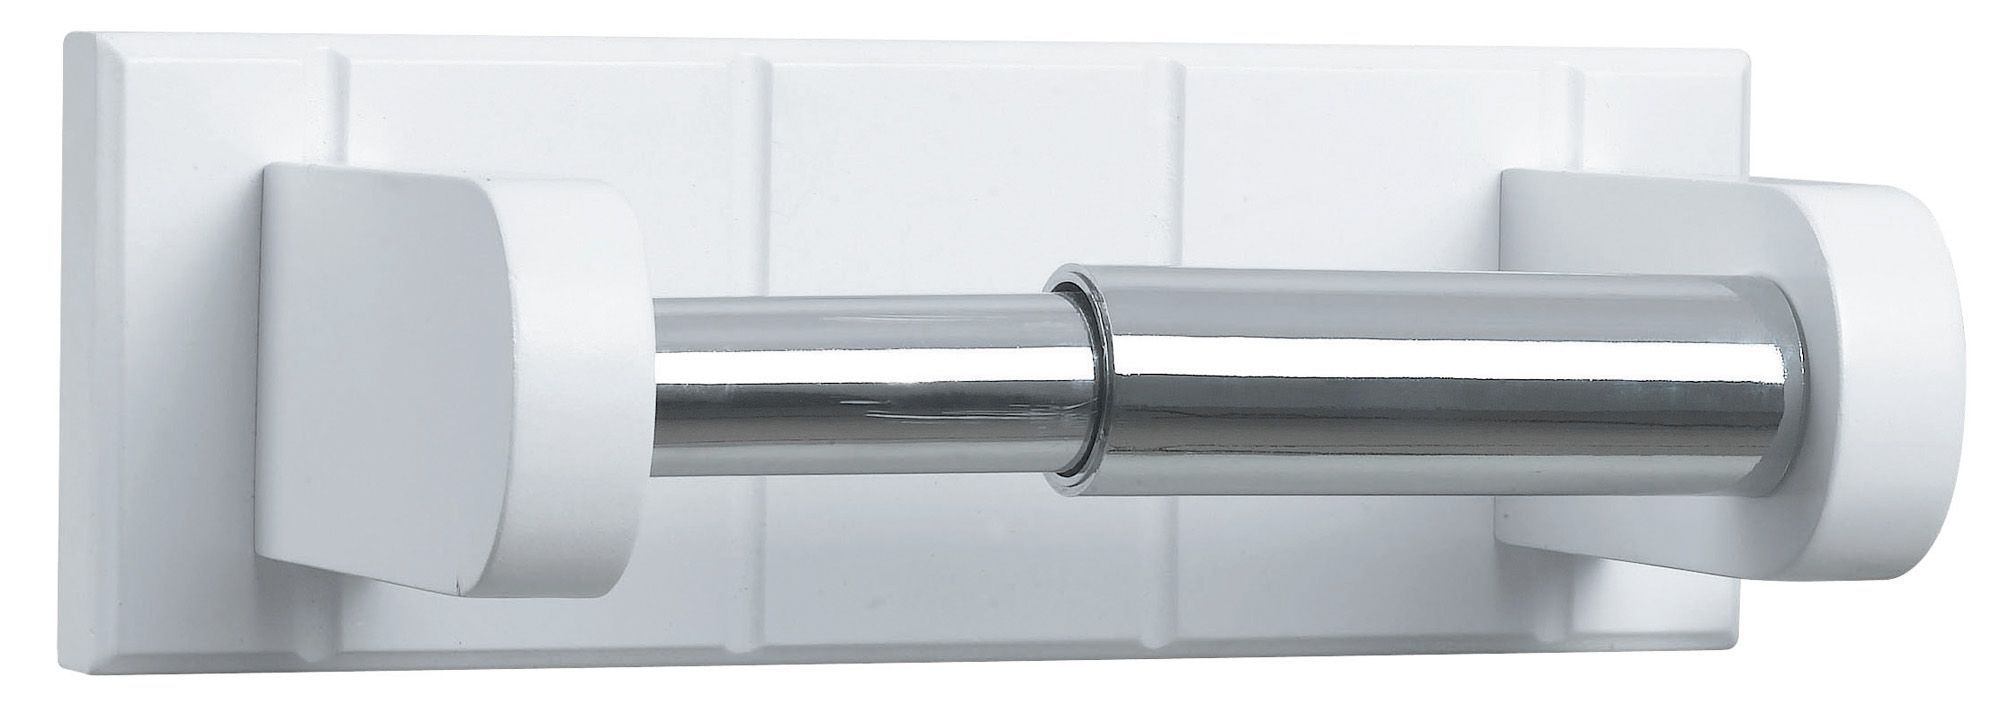 chrome kitchen roll holder wall mounted